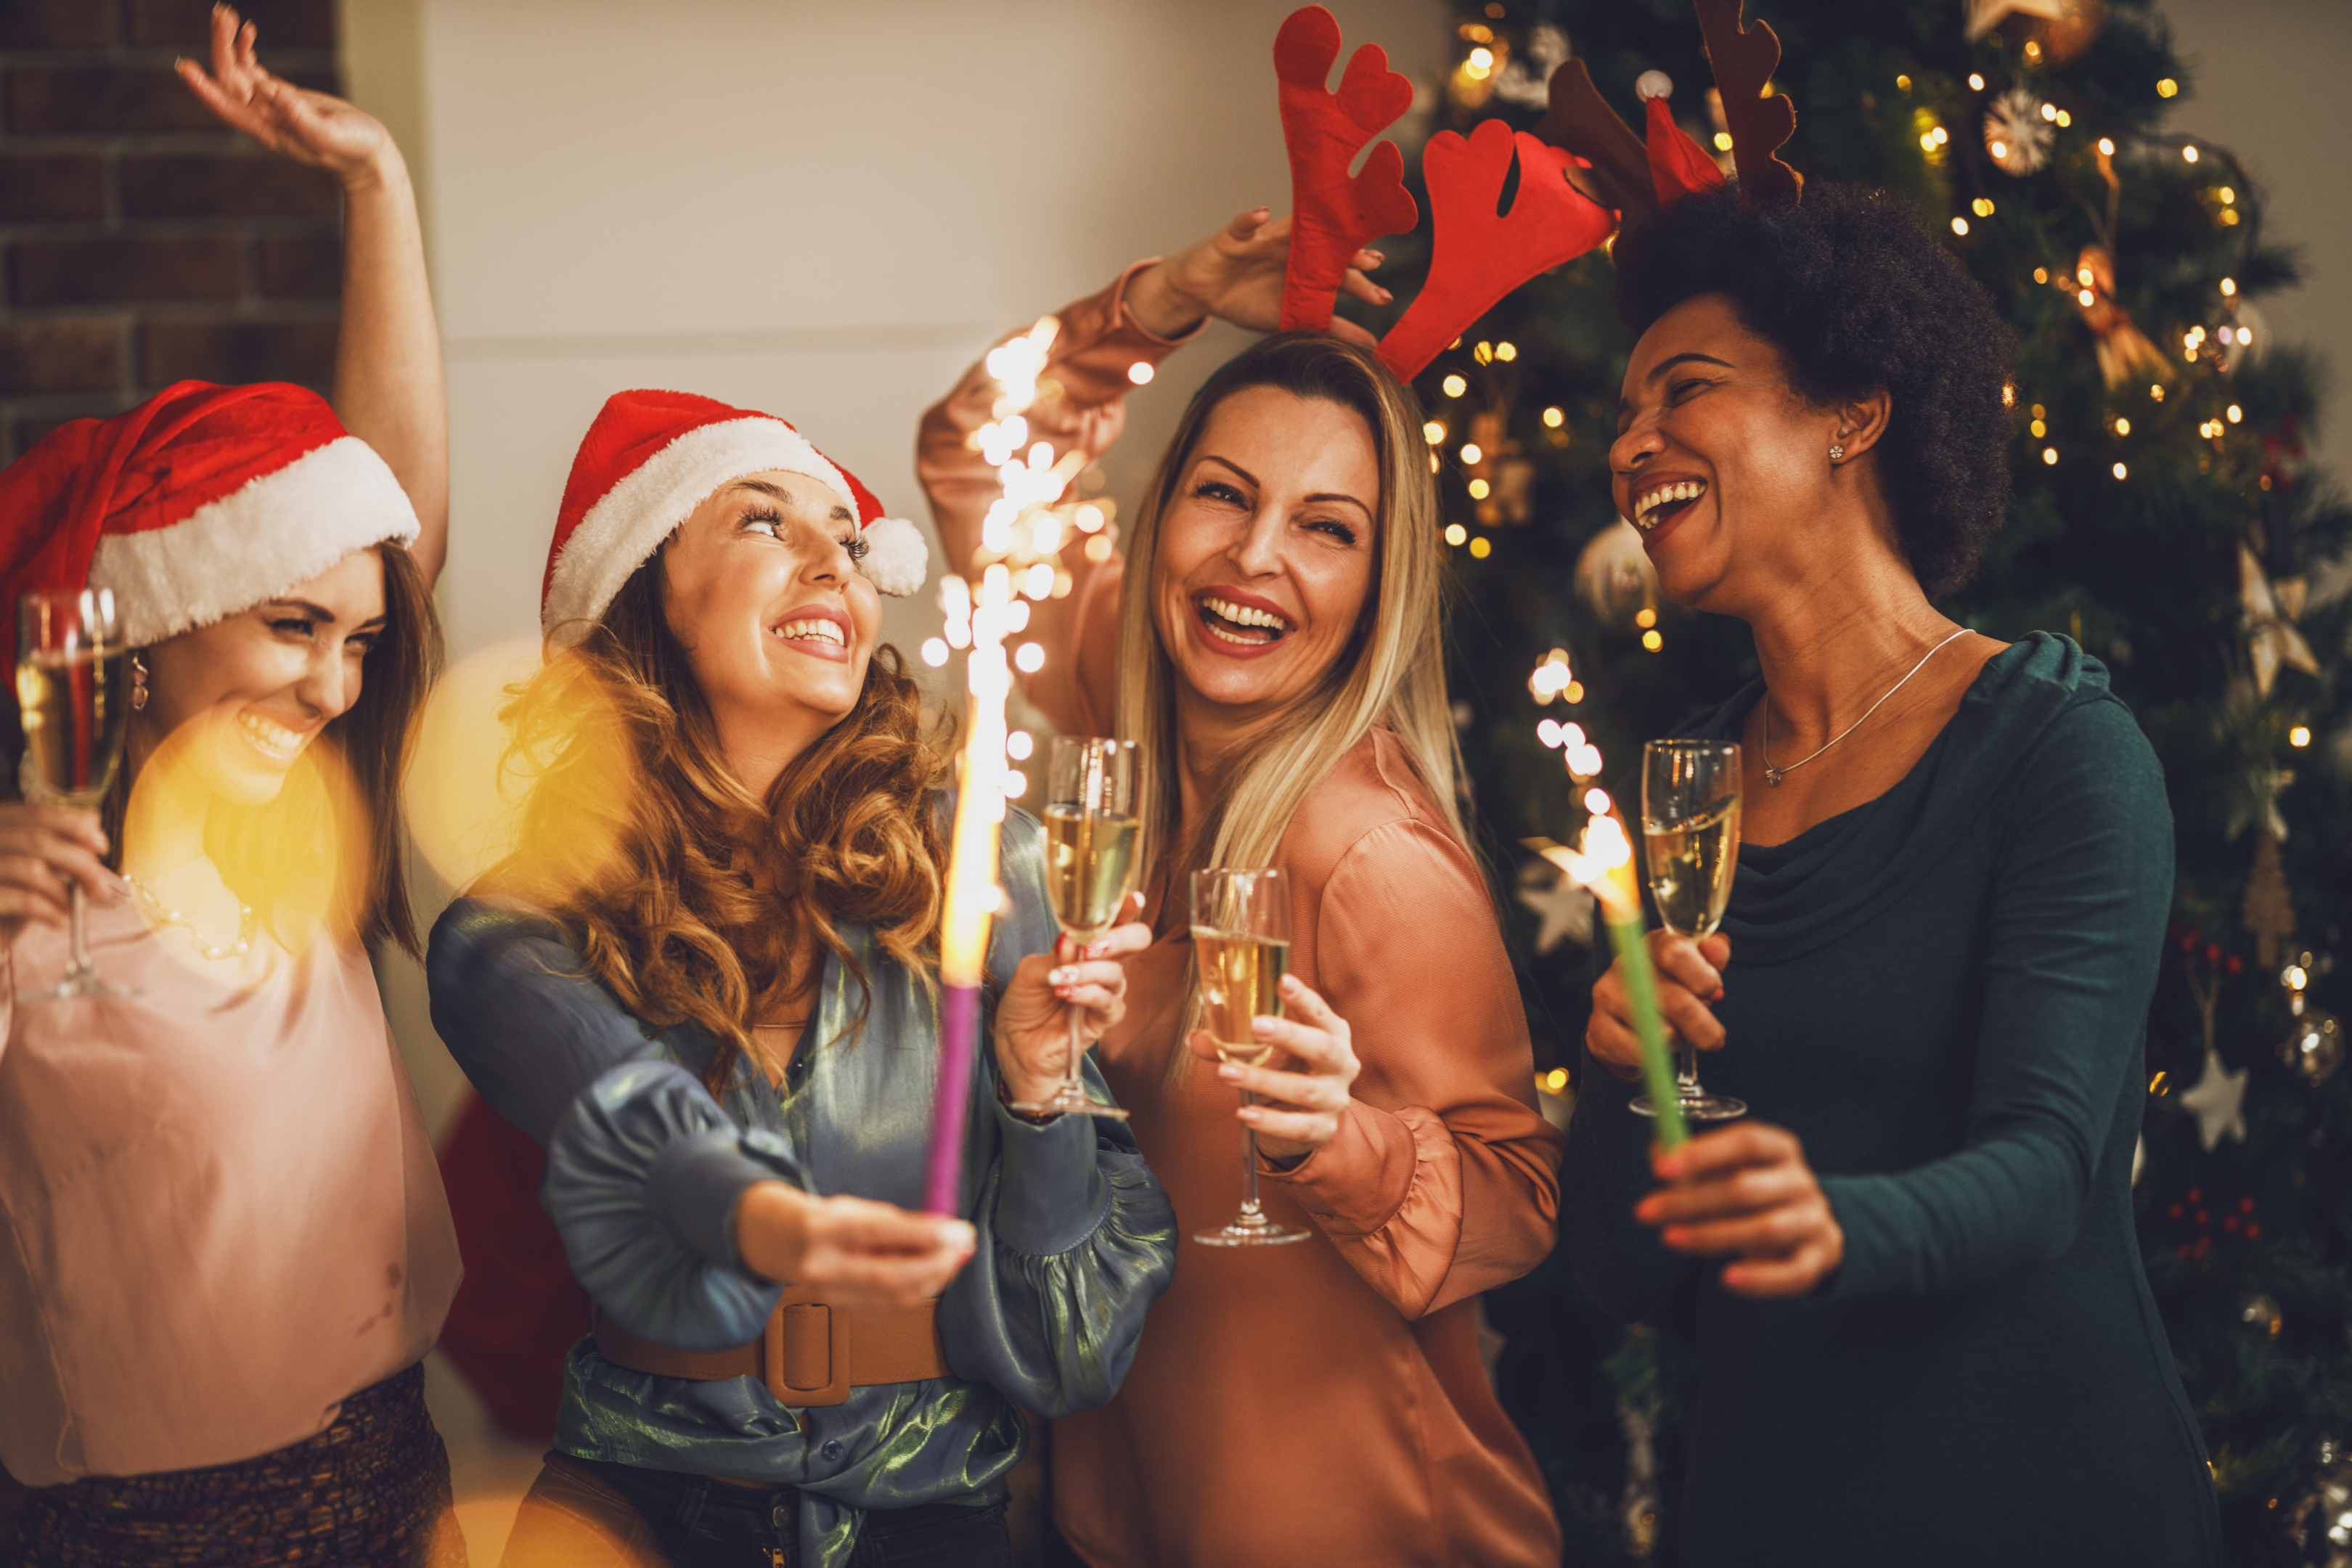 How Does Mobile Bar Work With Small Christmas Party? -